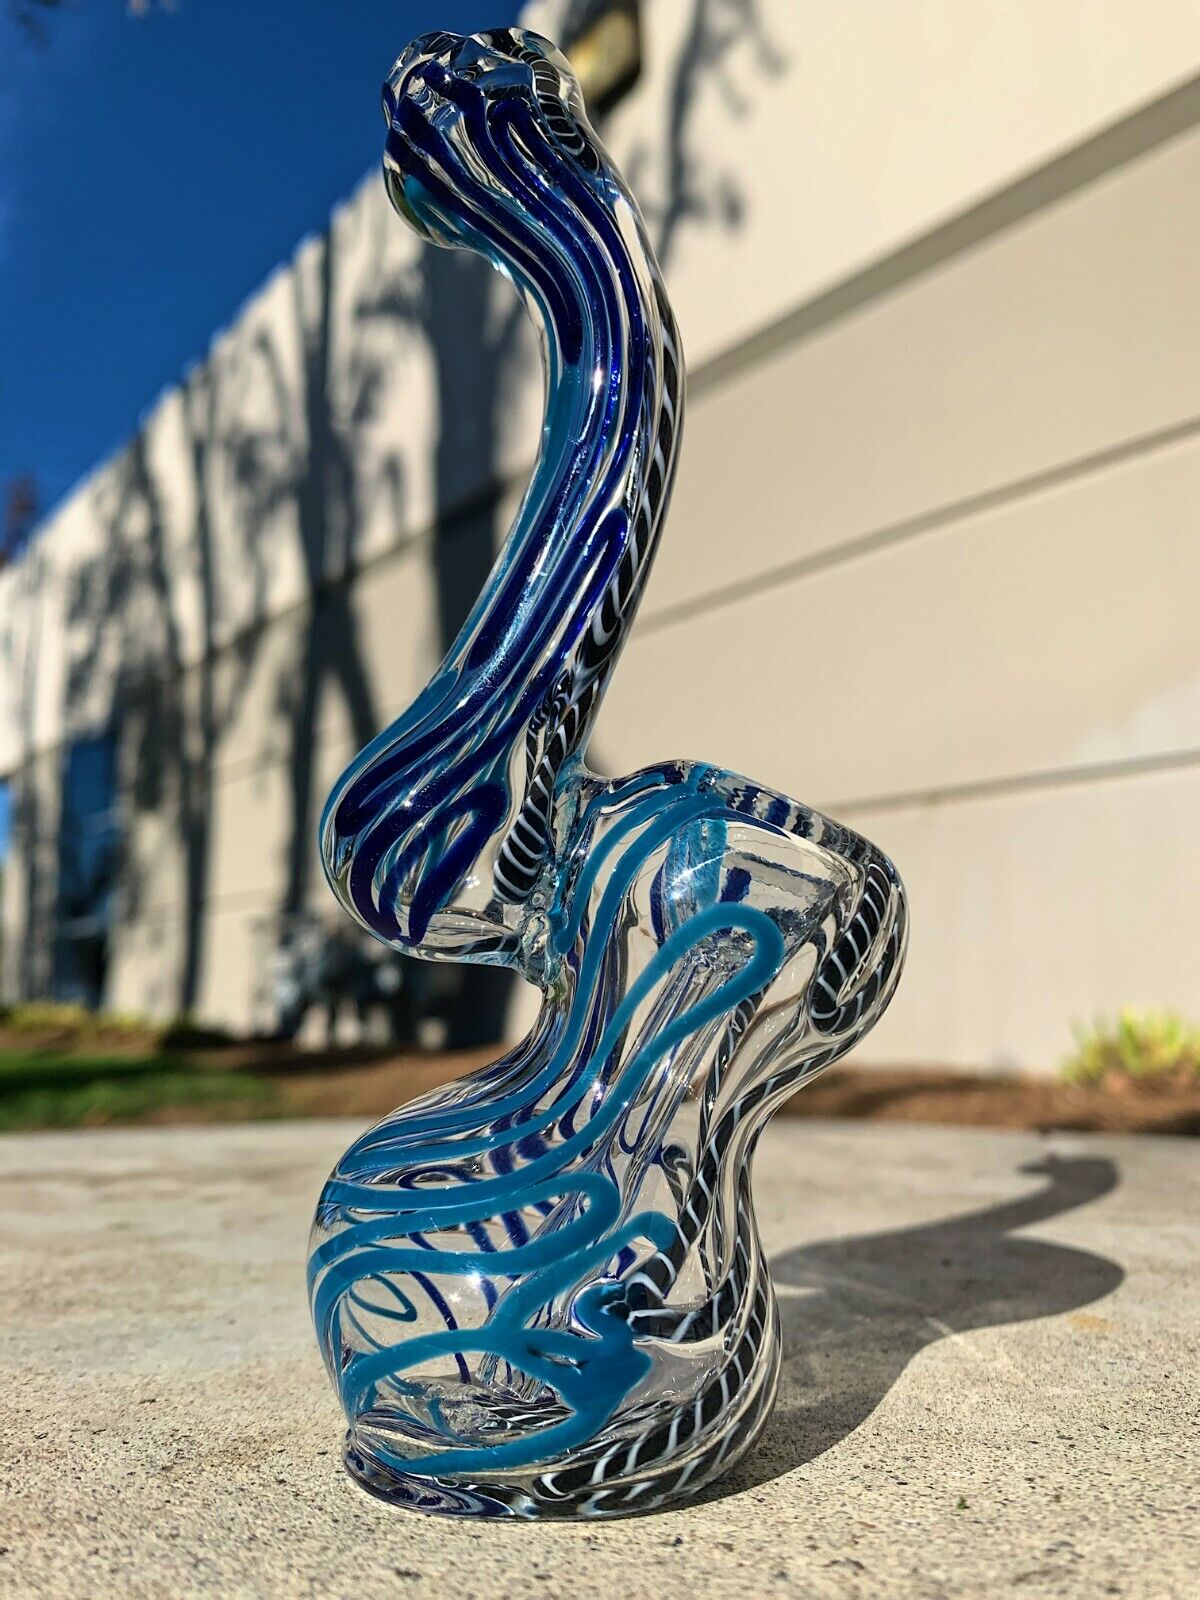 Hookah Water Pipe 6 Blue Swirl Bubbler Tobacco Bong w/ Carb Hole. Available Now for 14.99